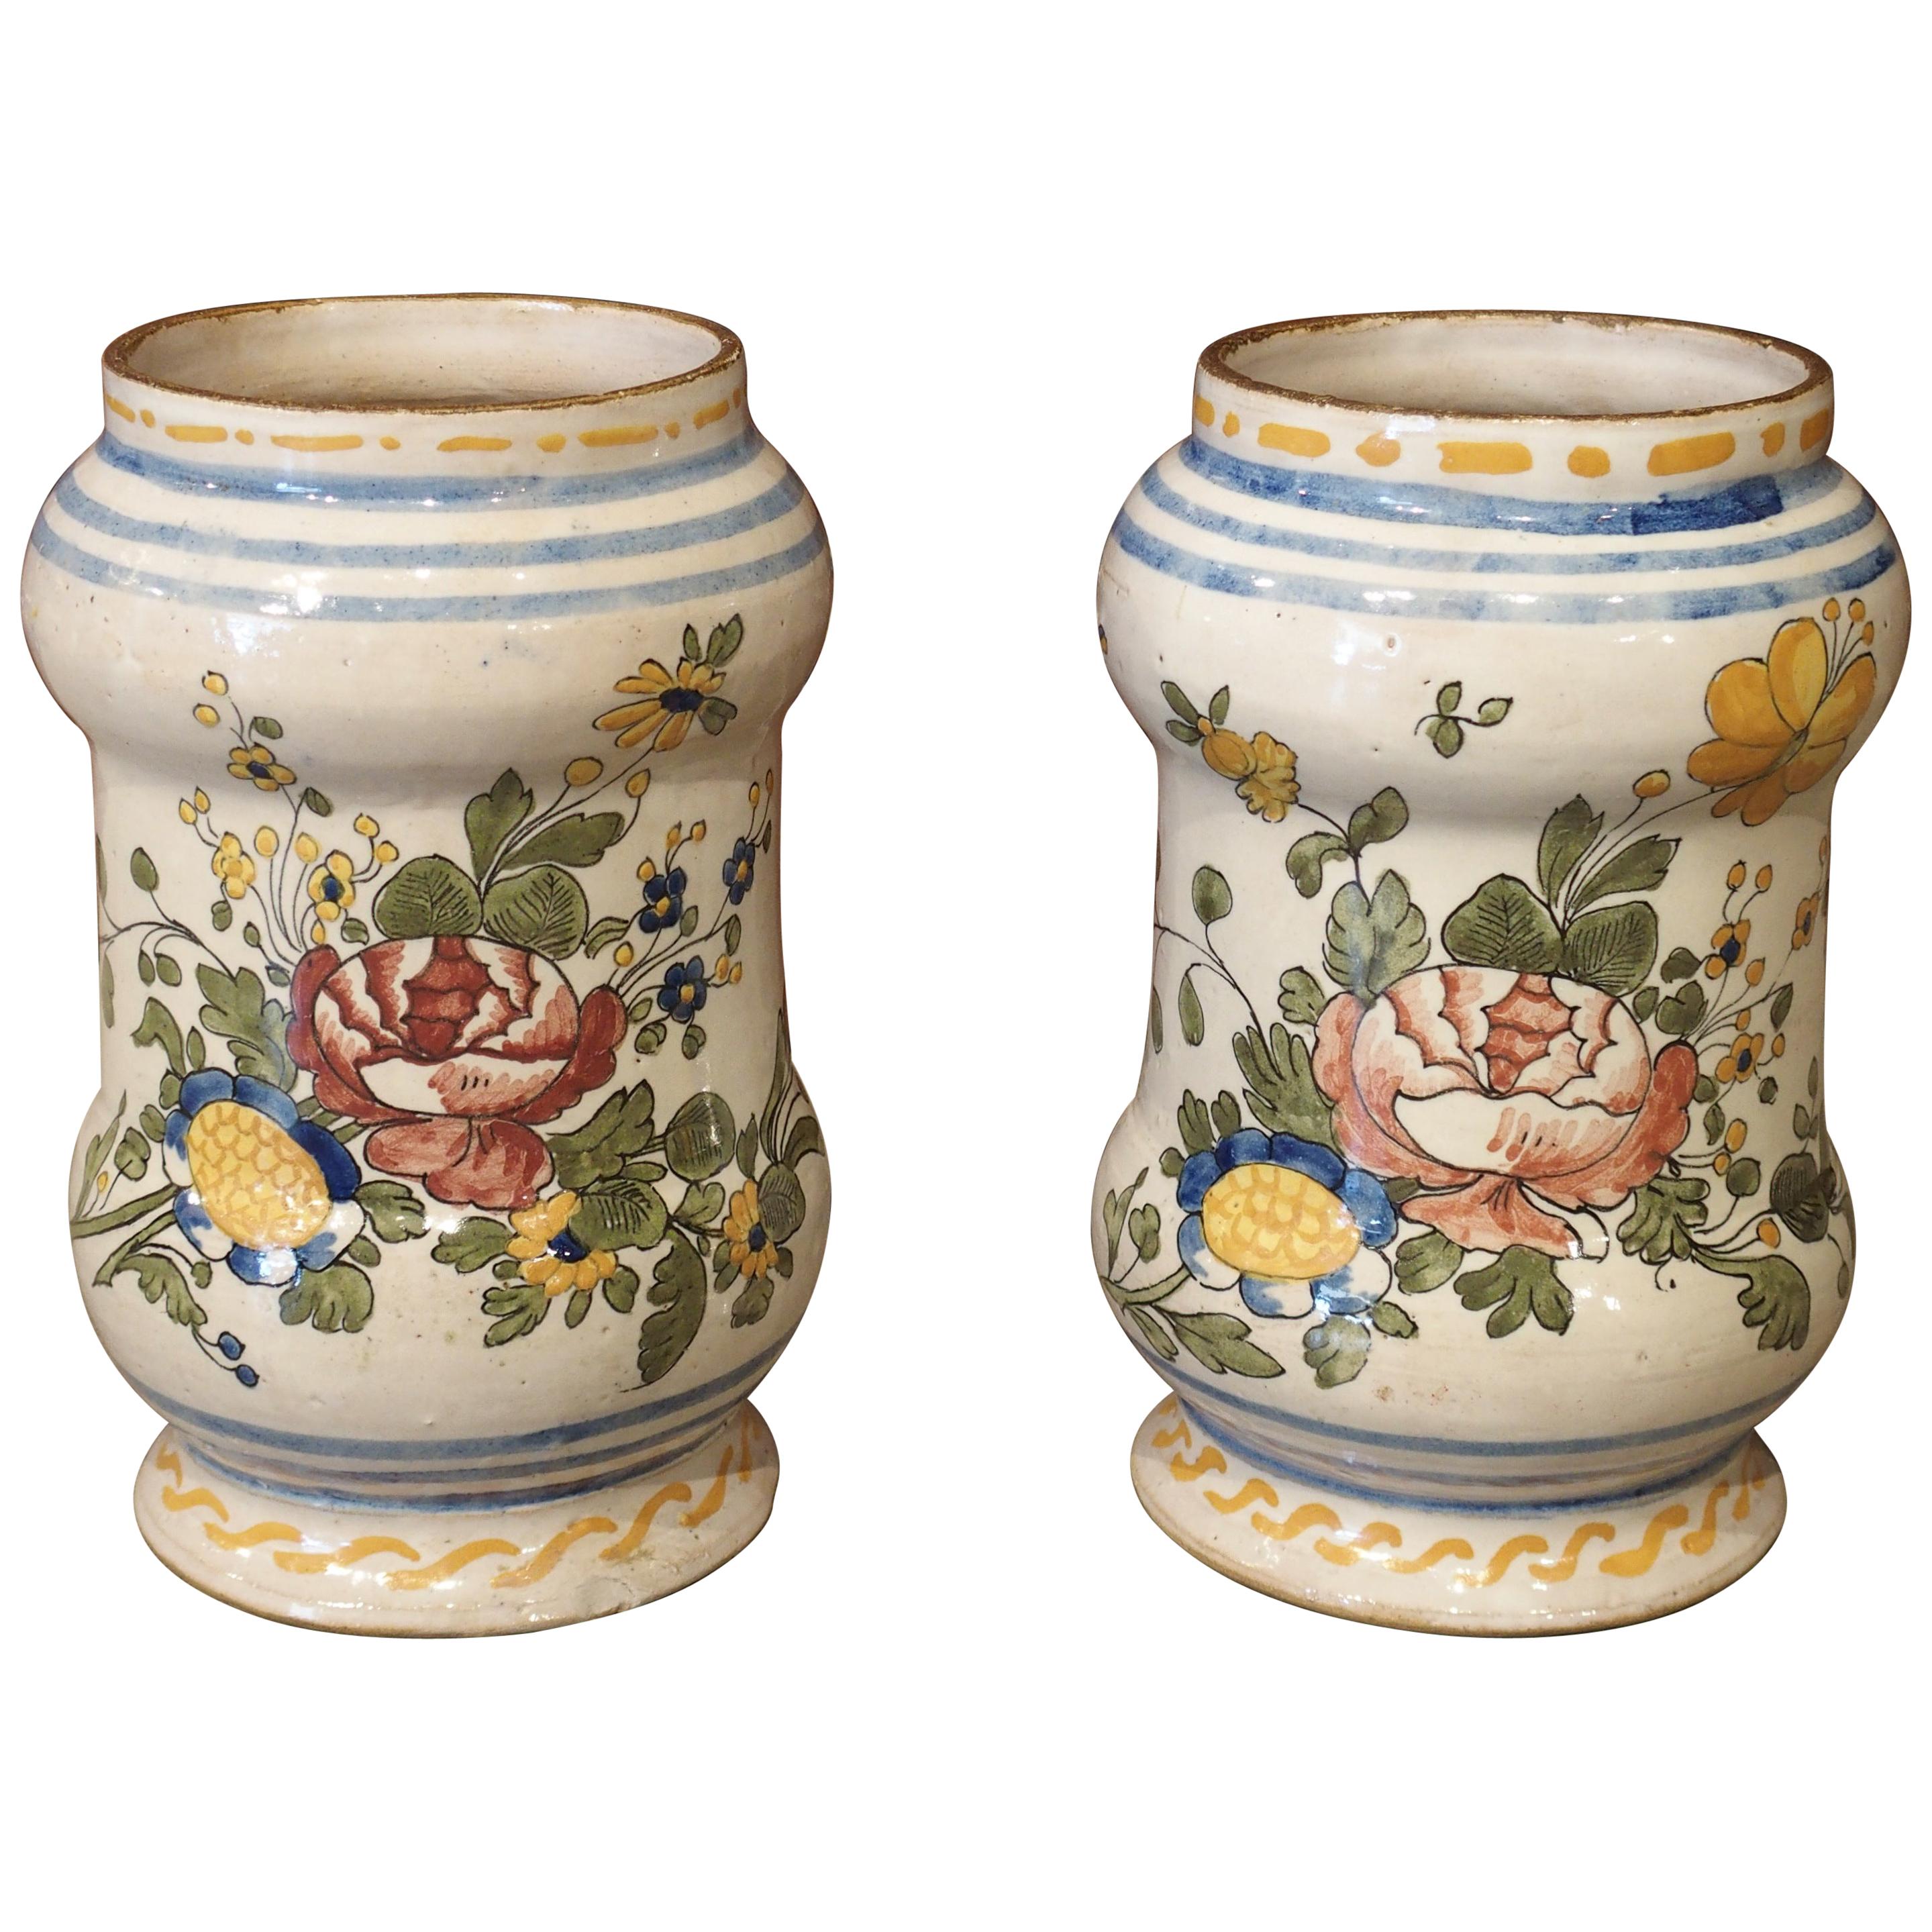 Pair of Antique Albarello Apothecary Jars from Italy